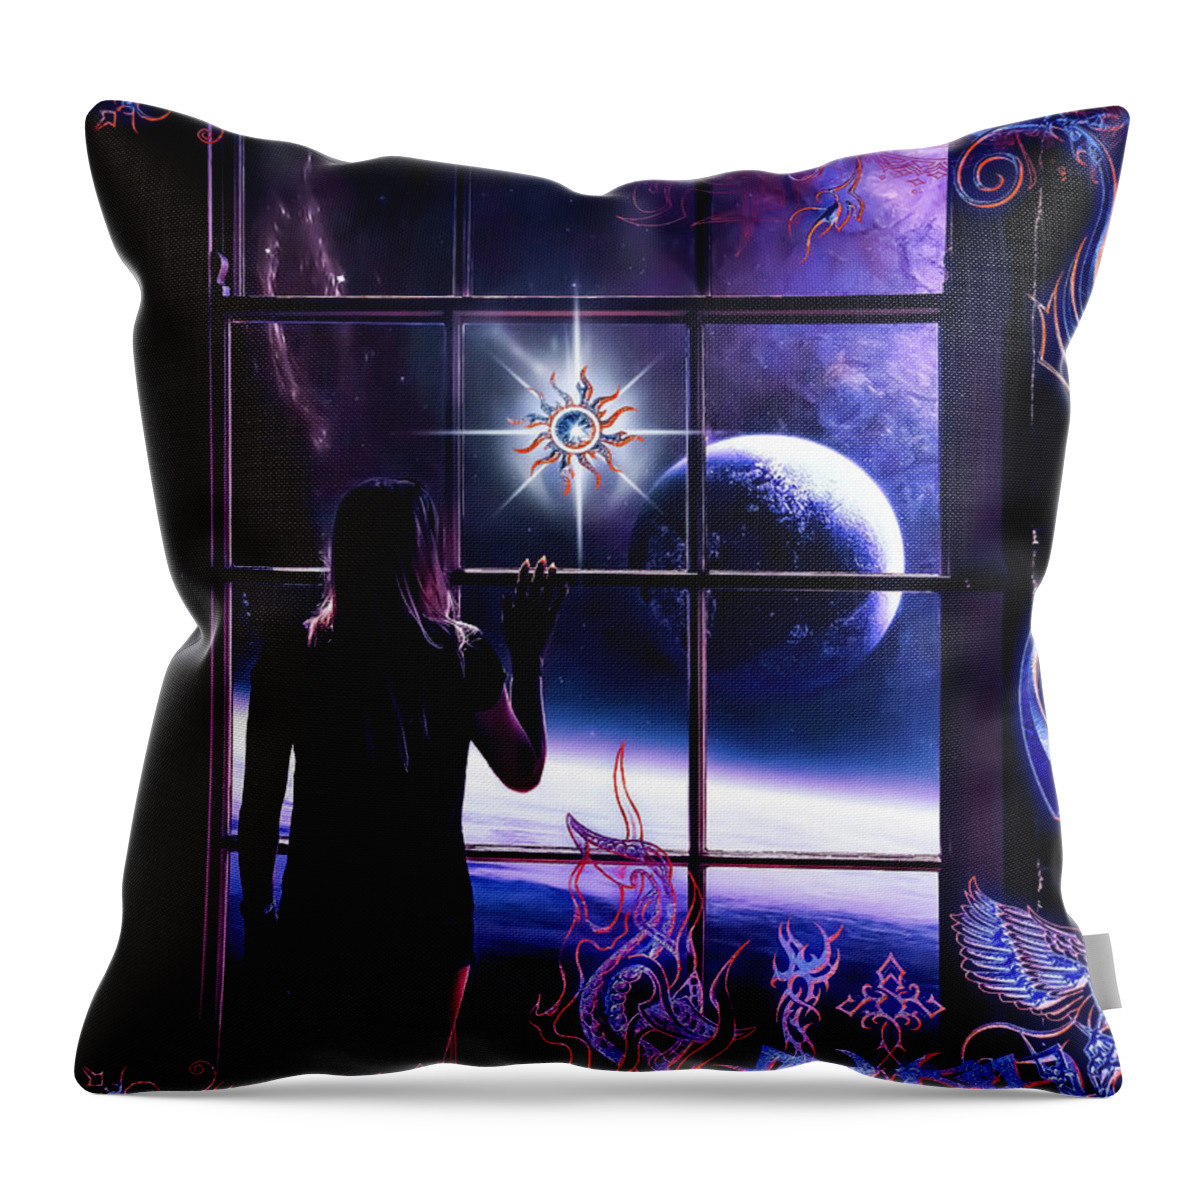 World Throw Pillow featuring the digital art A New World by Michael Damiani